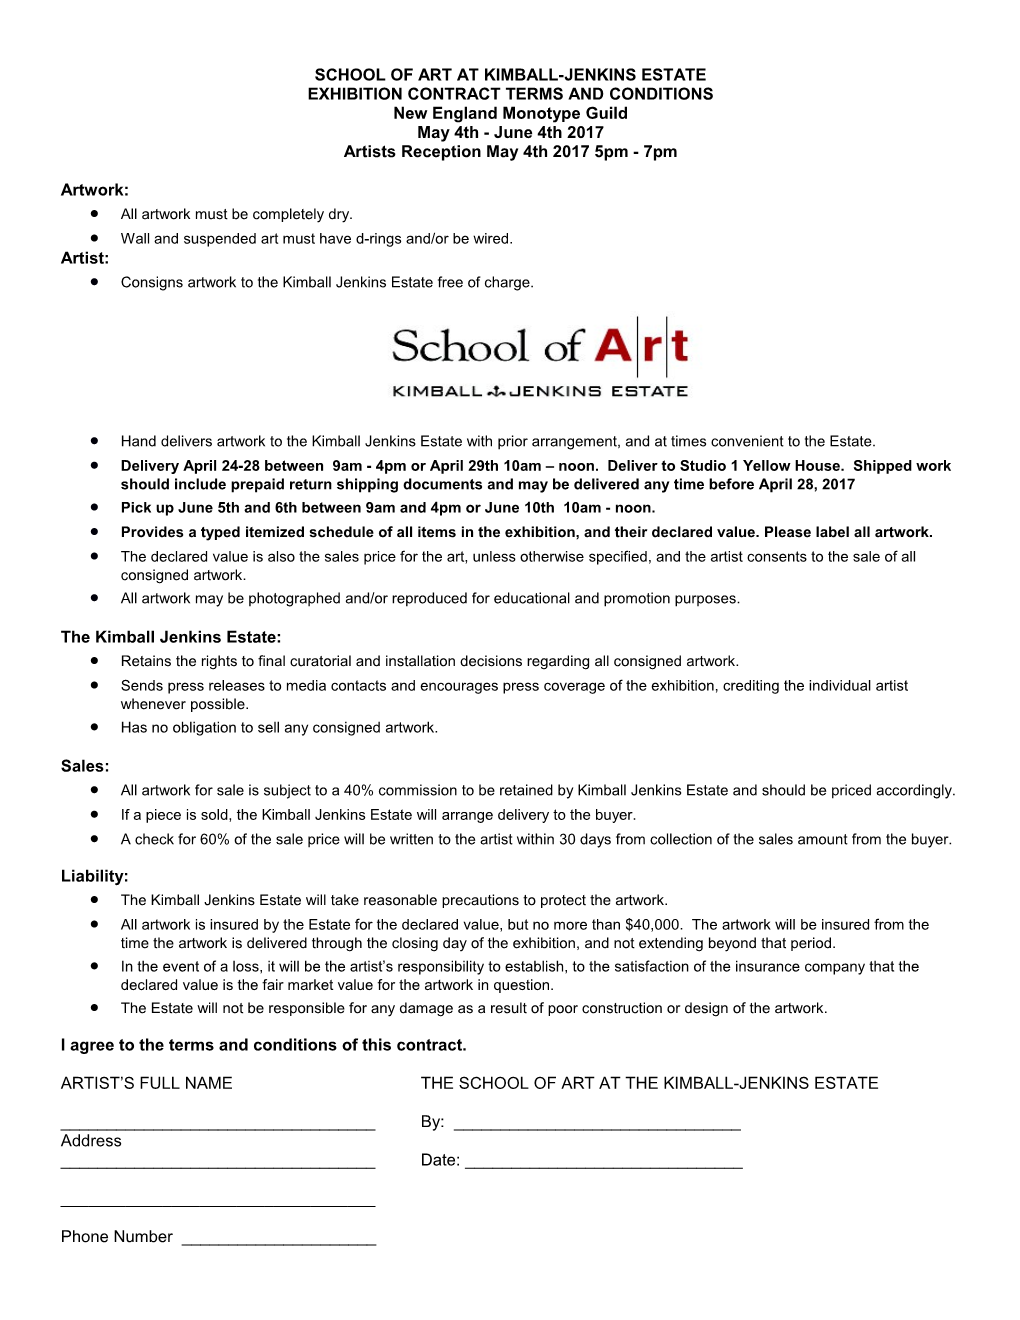 Artist Contract and Liability Statement